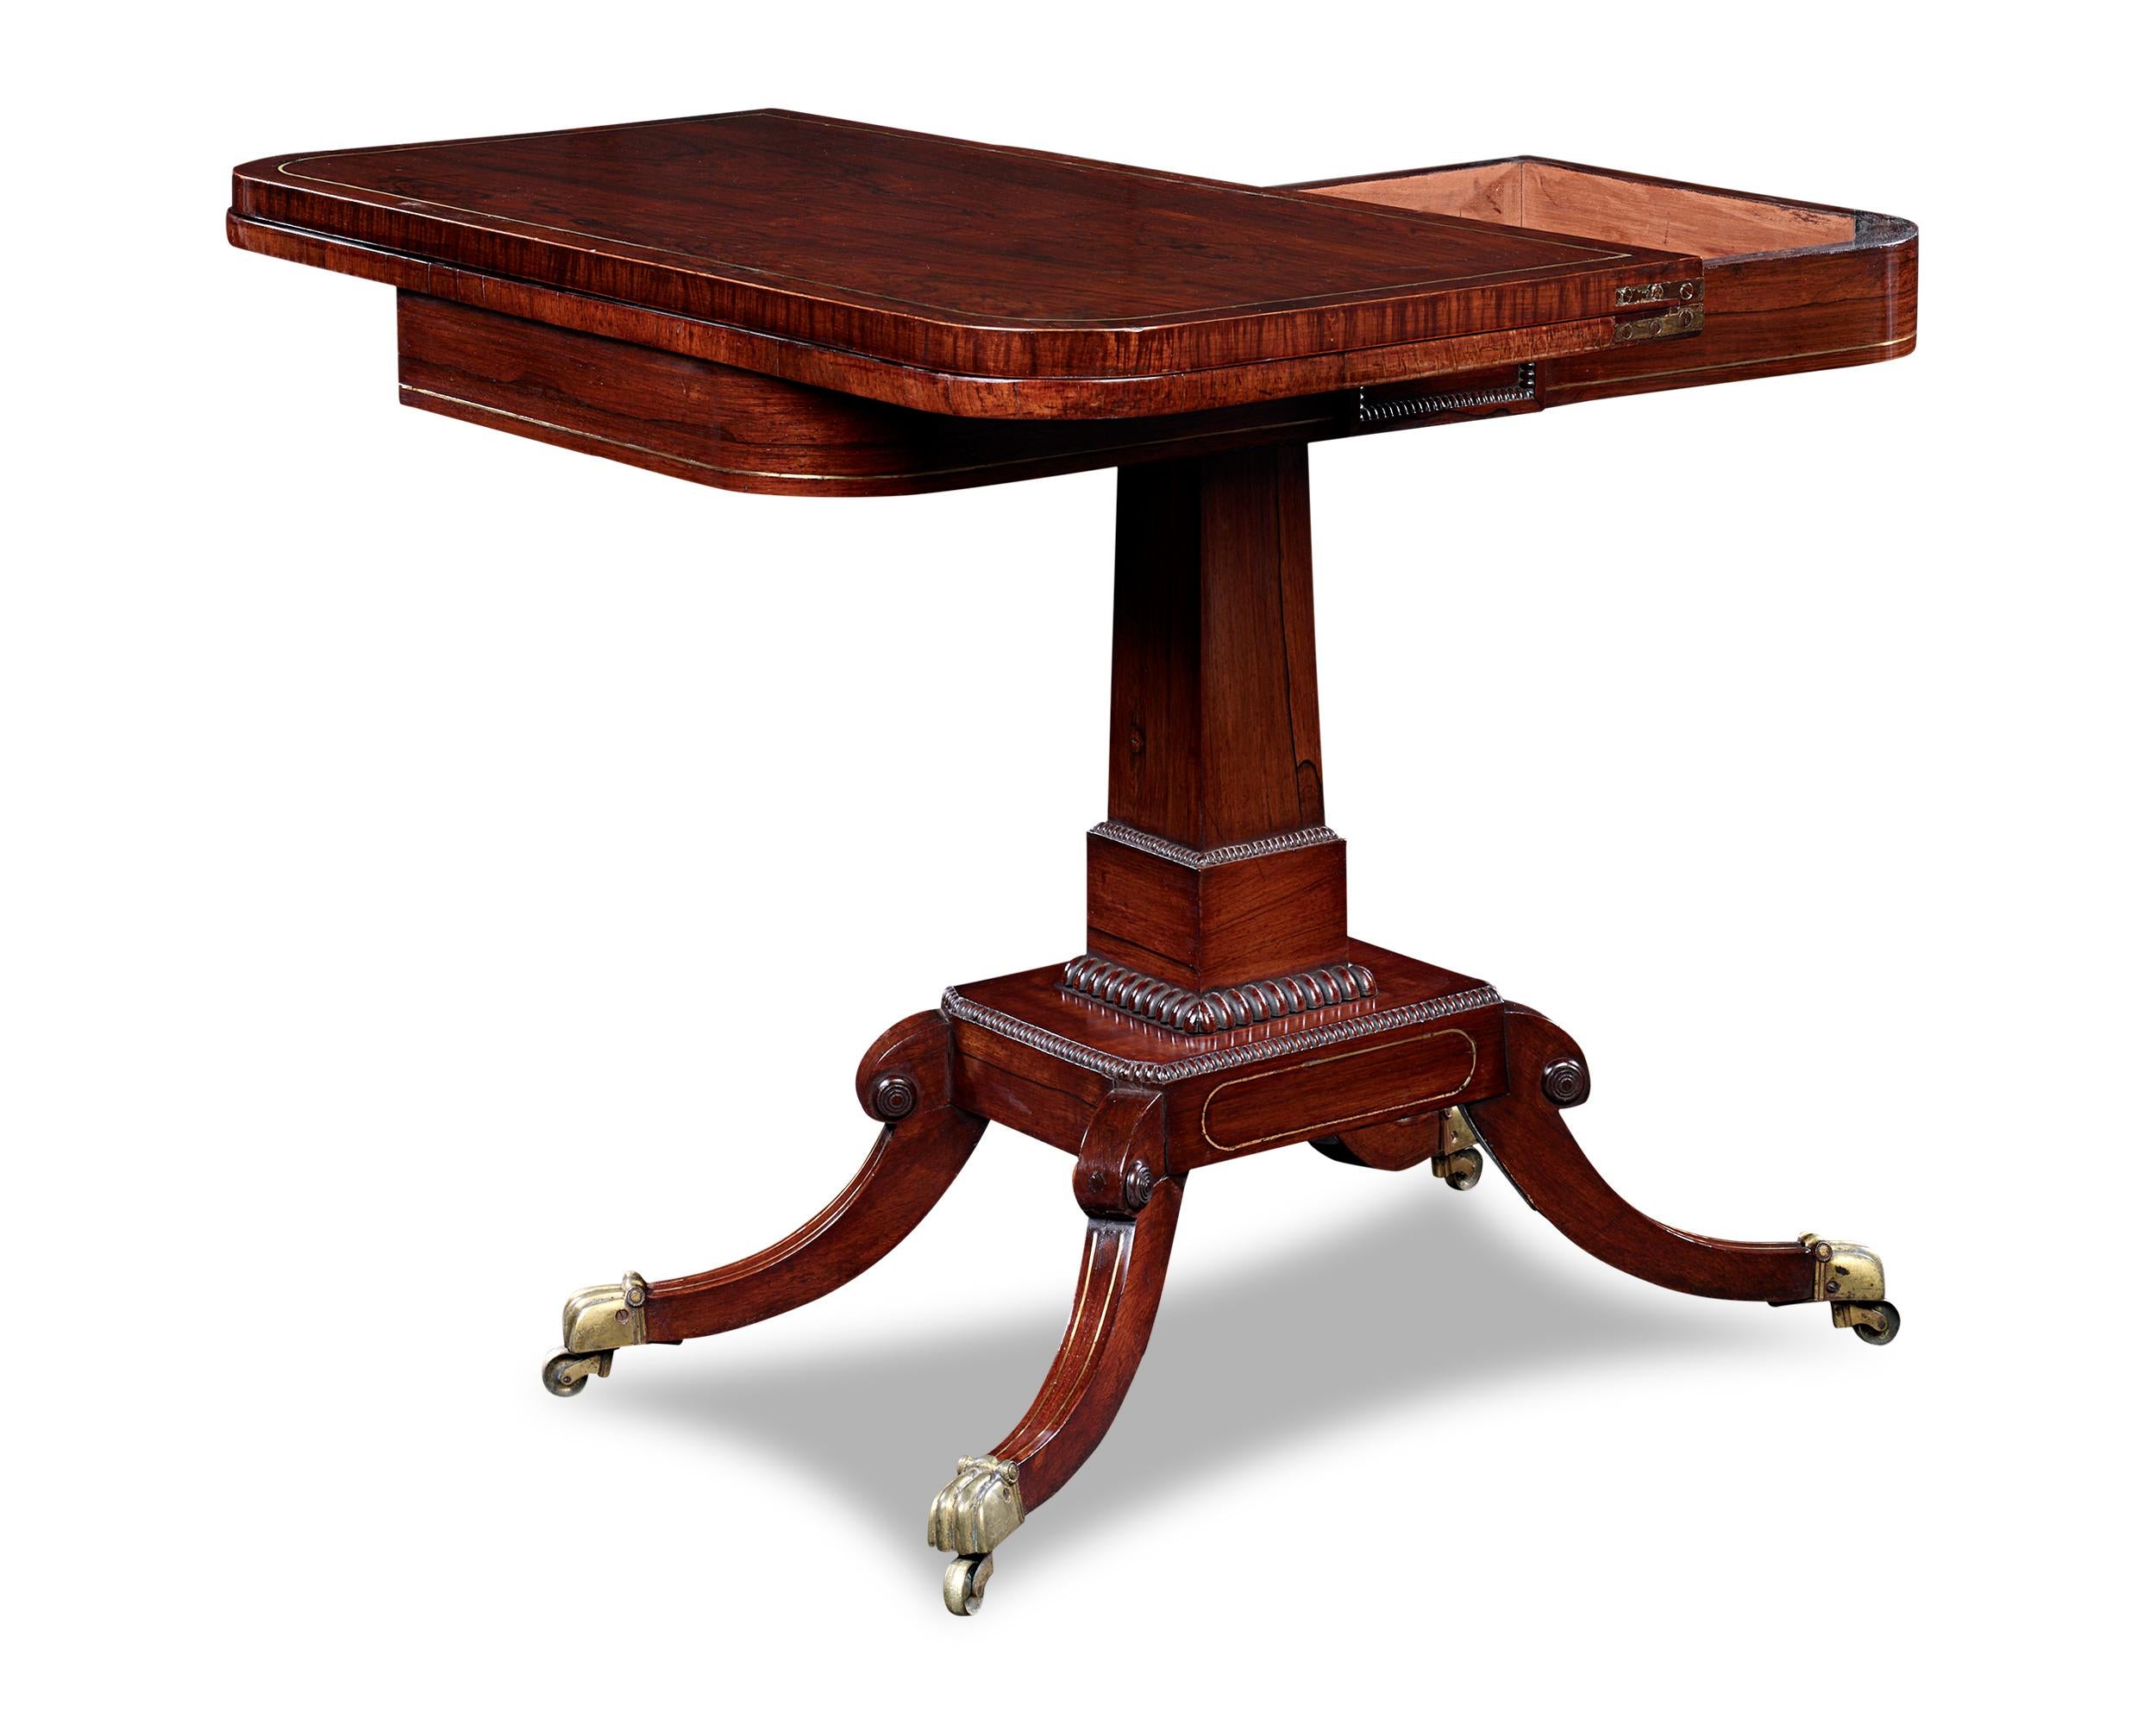 This ingenious late Regency card table was designed with both beauty and entertainment in mind. When not in use, its folded D-shaped top sits against the wall providing an elegant side table. When the time comes to play a game of cards, the tabletop